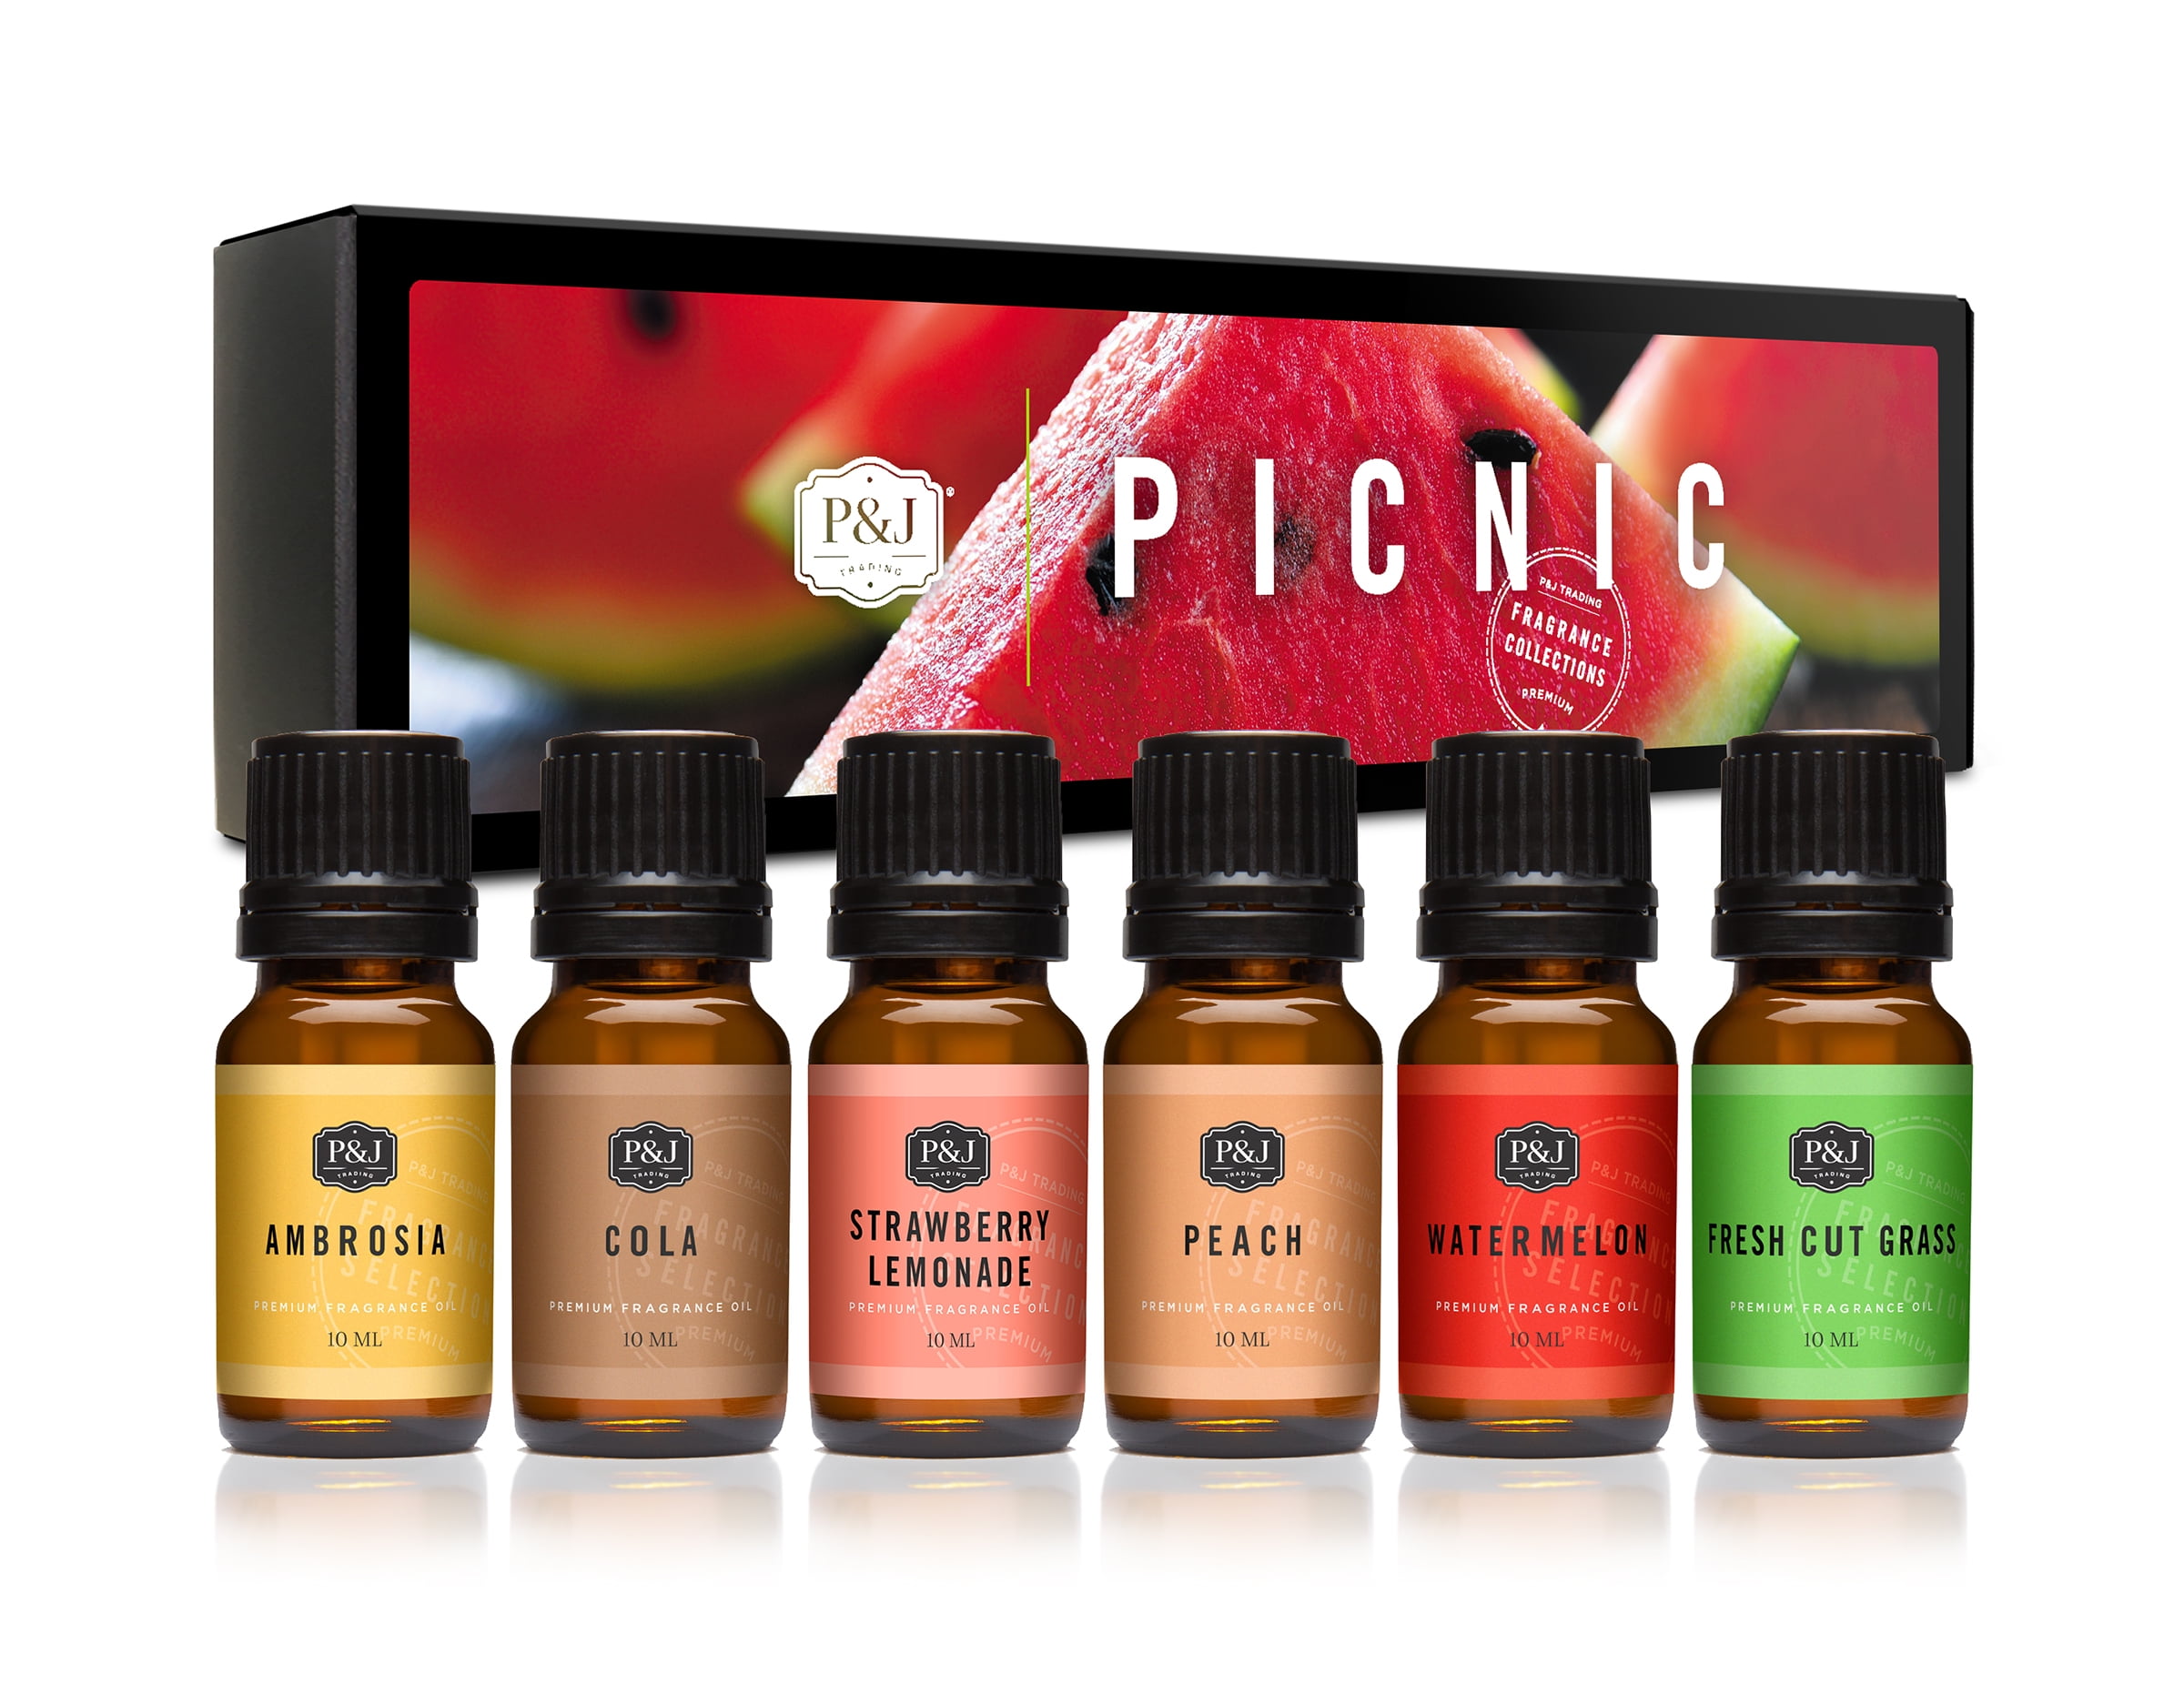 P&J Trading p&j picnic set of 6 premium fragrance oil for candle making &  soap making, lotions, haircare, diffuser oils scents